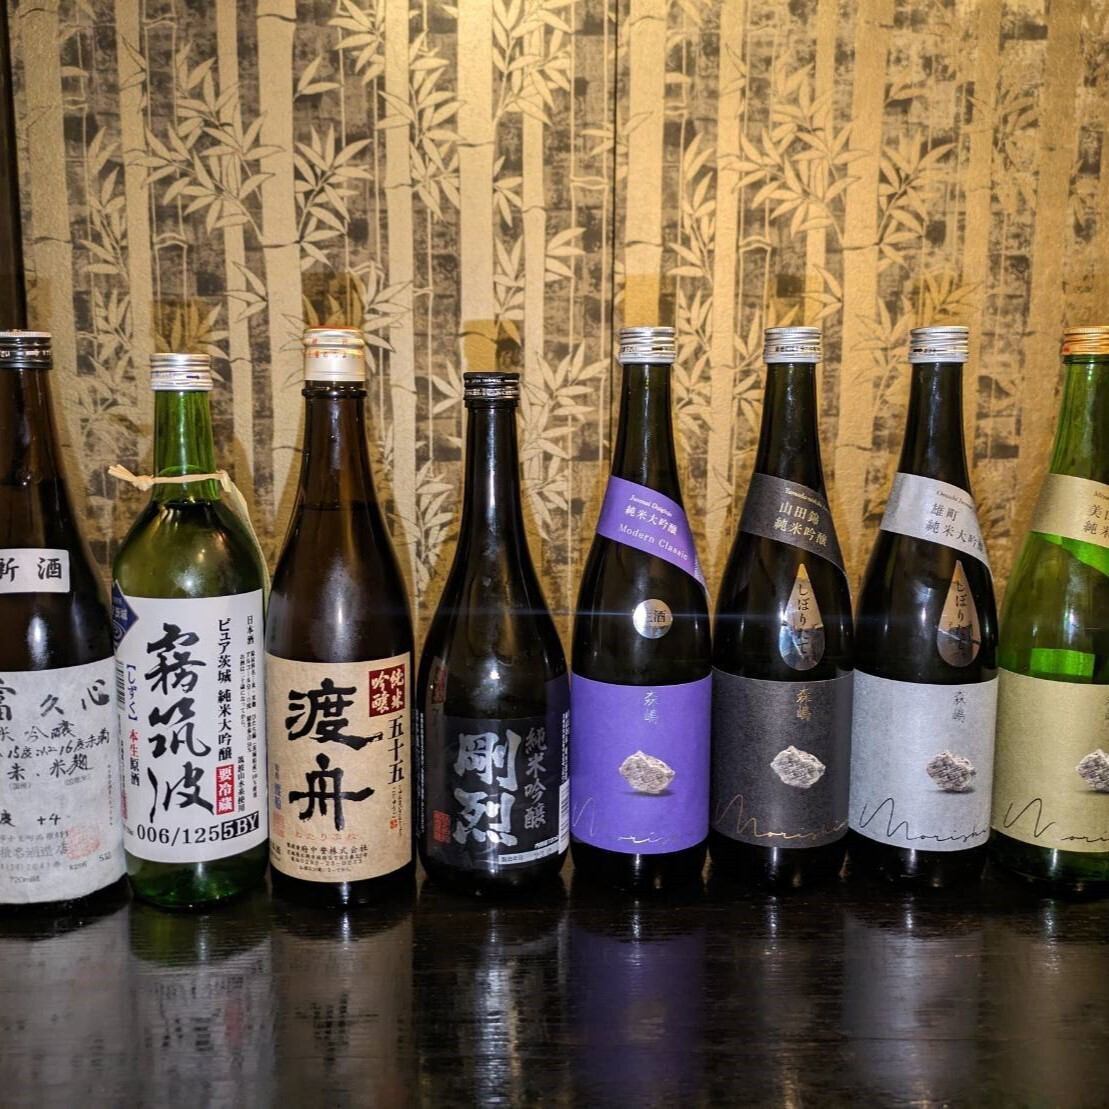 We have a wide selection of sake and shochu that go well with the food.